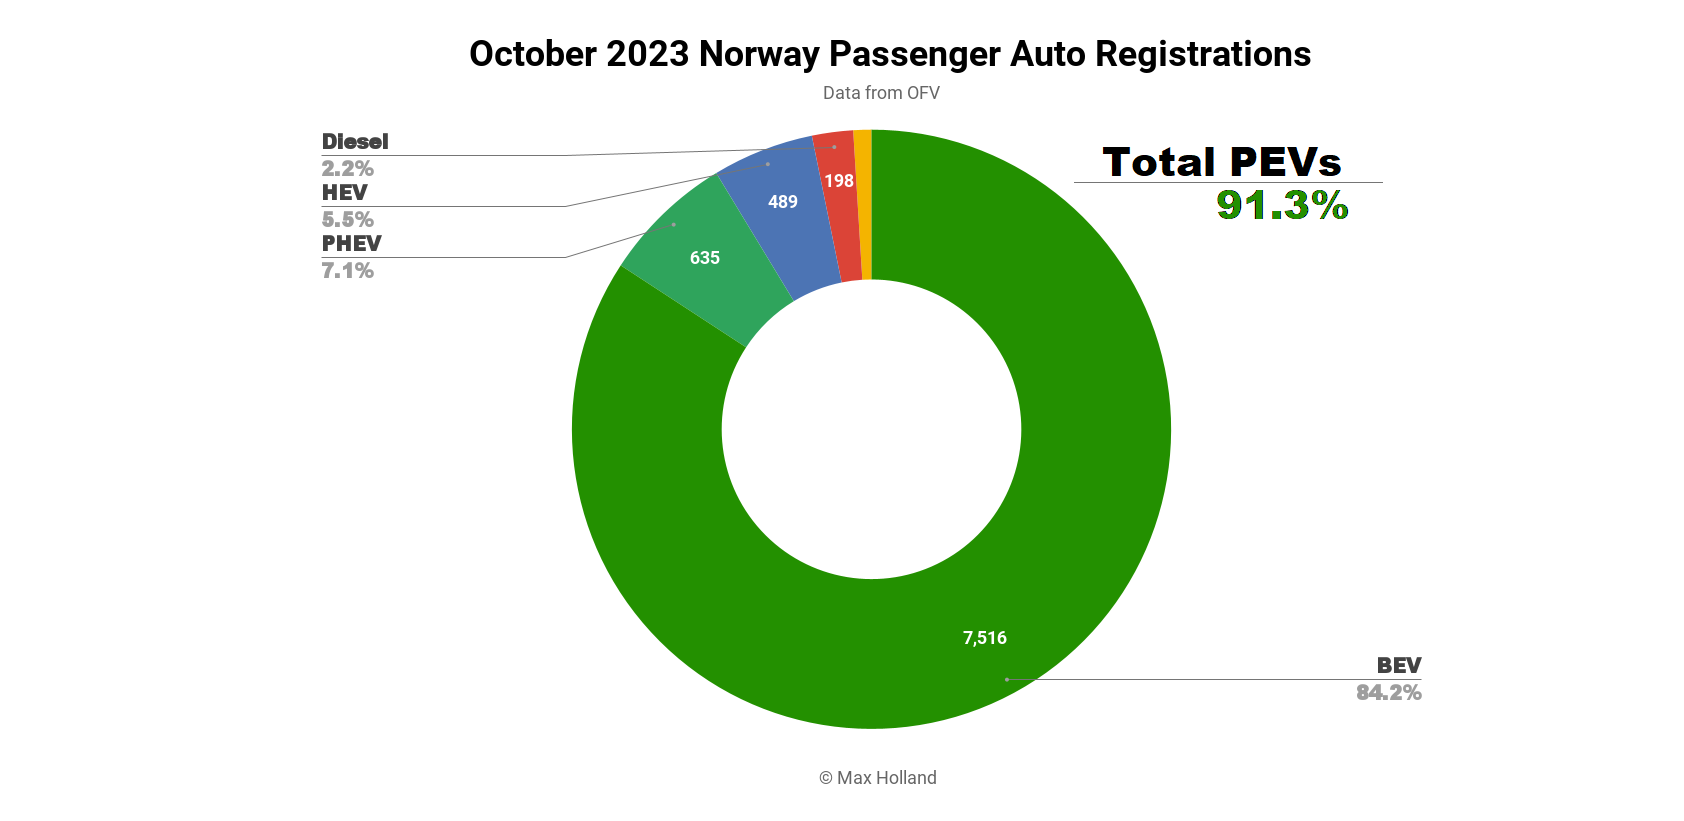 EVs At 91.3% Share In Norway - Shrinking Auto Market